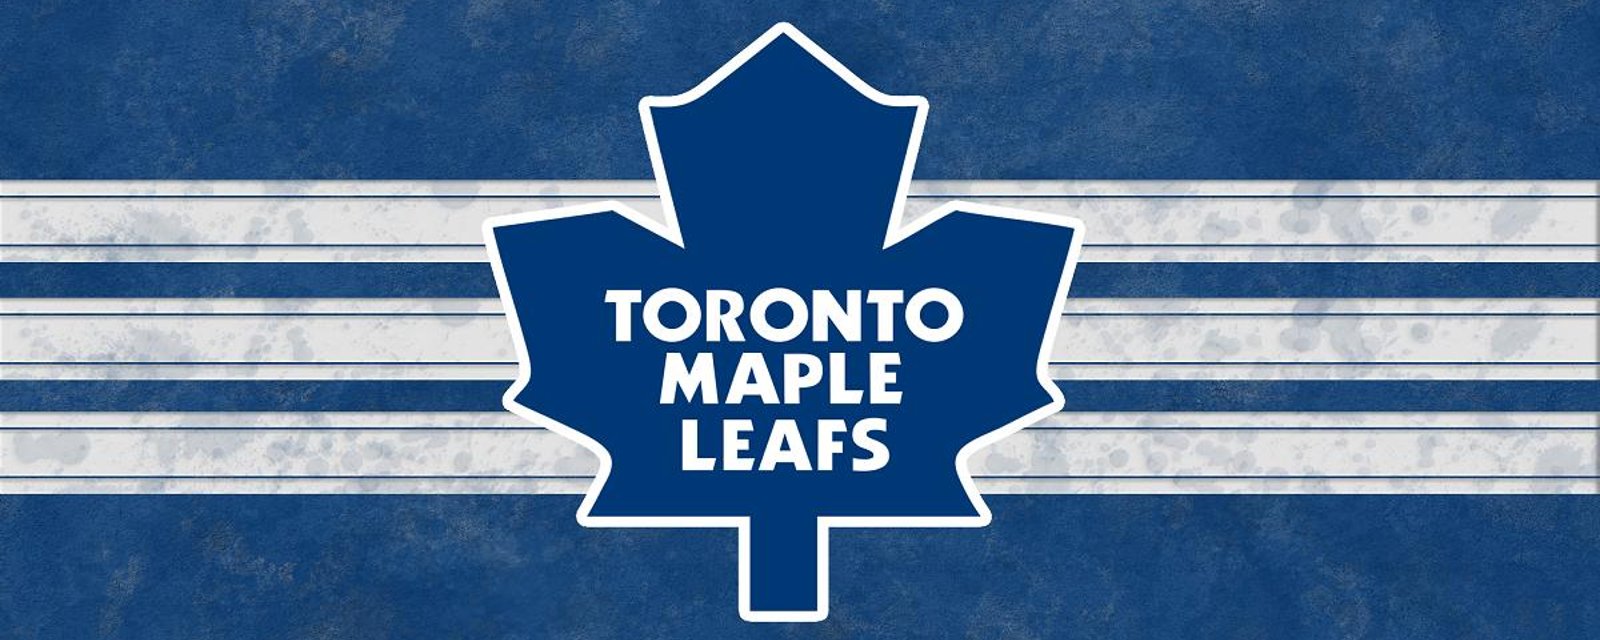 Another lead going into the third, another loss for the Leafs